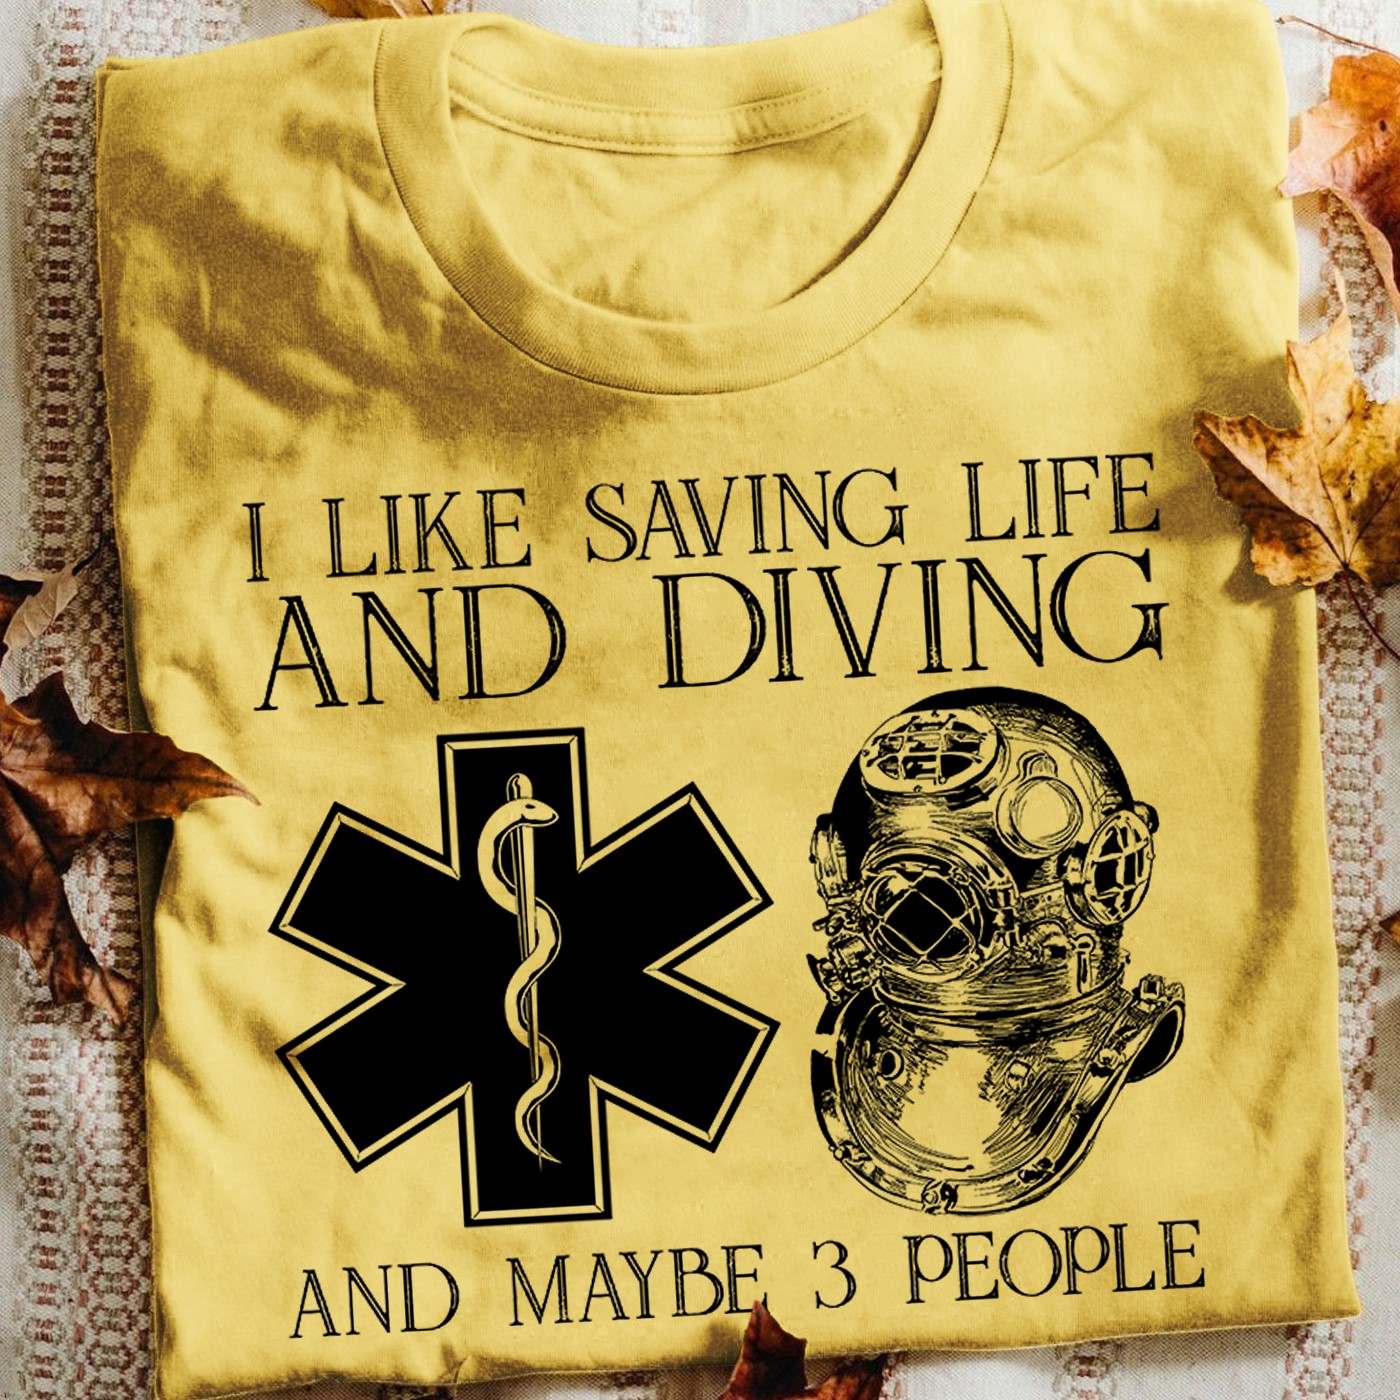 I like saving life and diving and maybe 3 people - Emergency Medical Technician